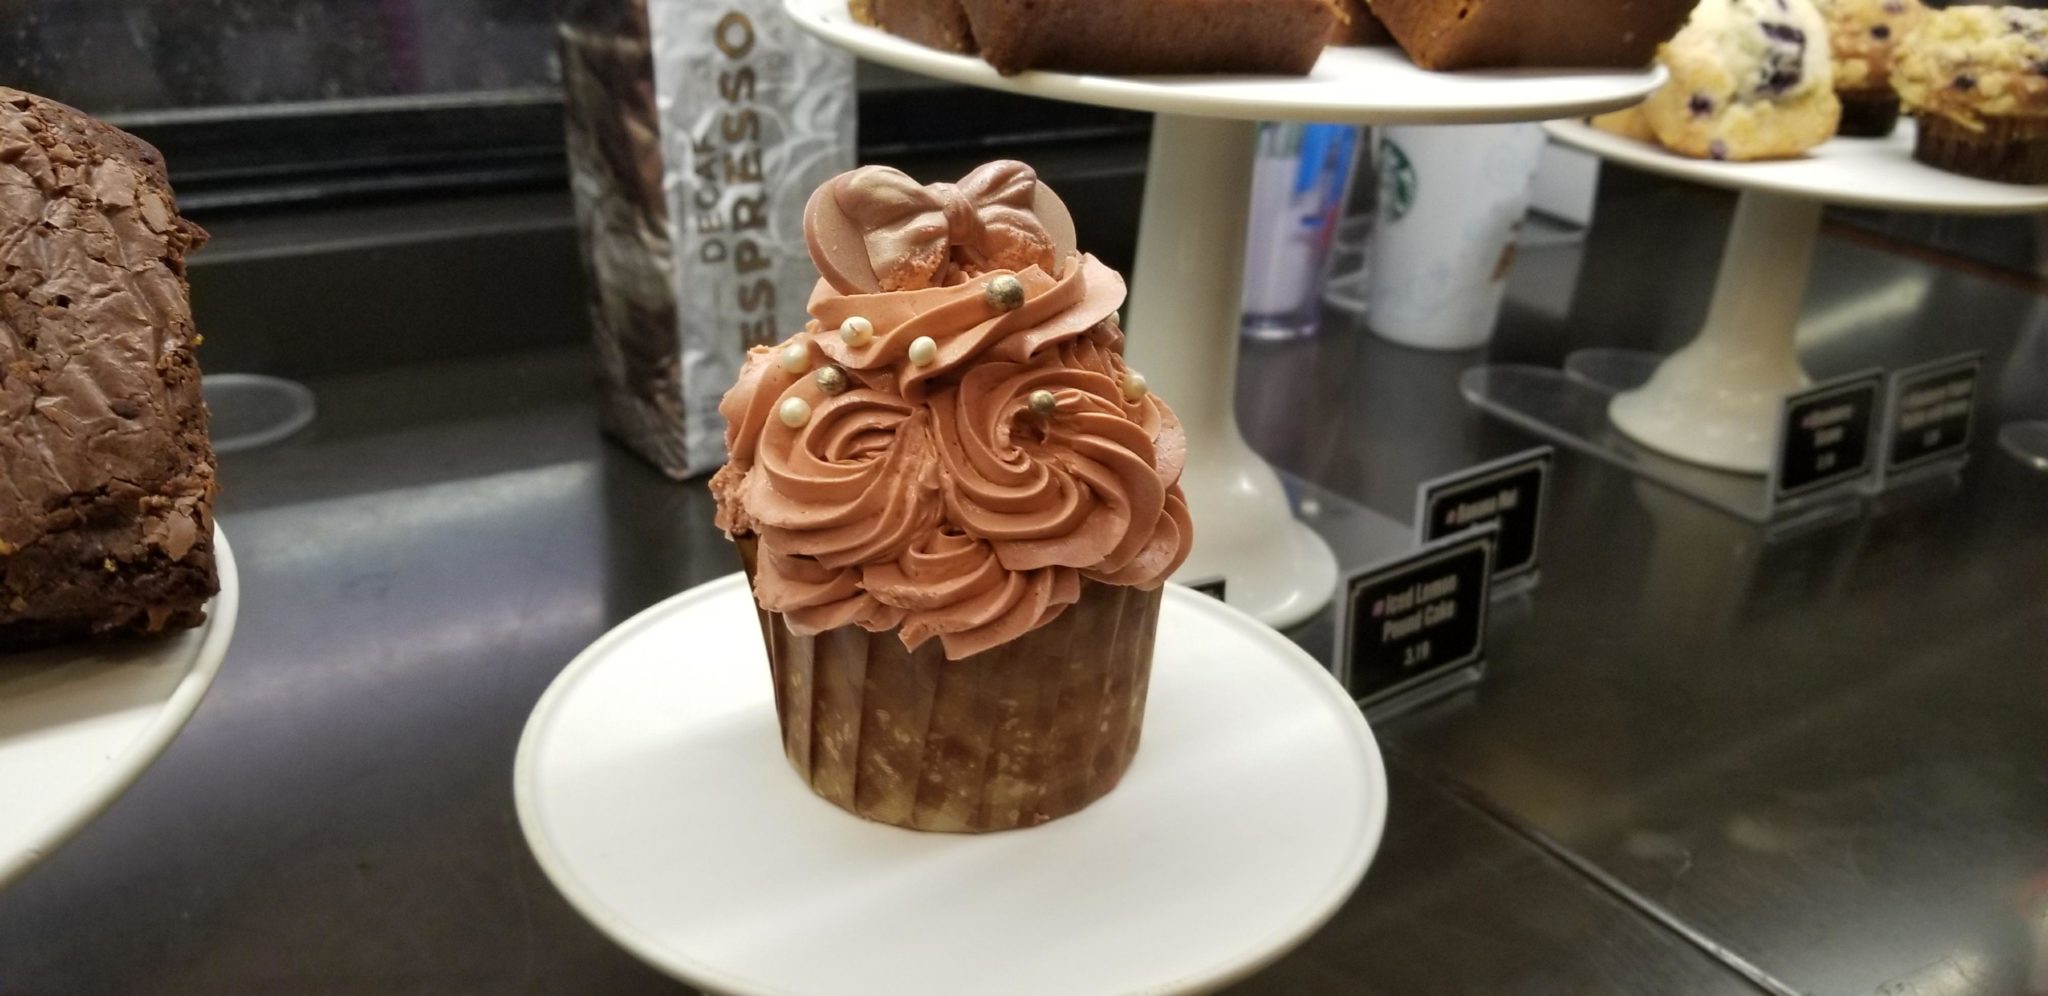 Enjoy a Rose Gold Cupcake While Rocking Your Rose Gold Ears at the Magic Kingdom!